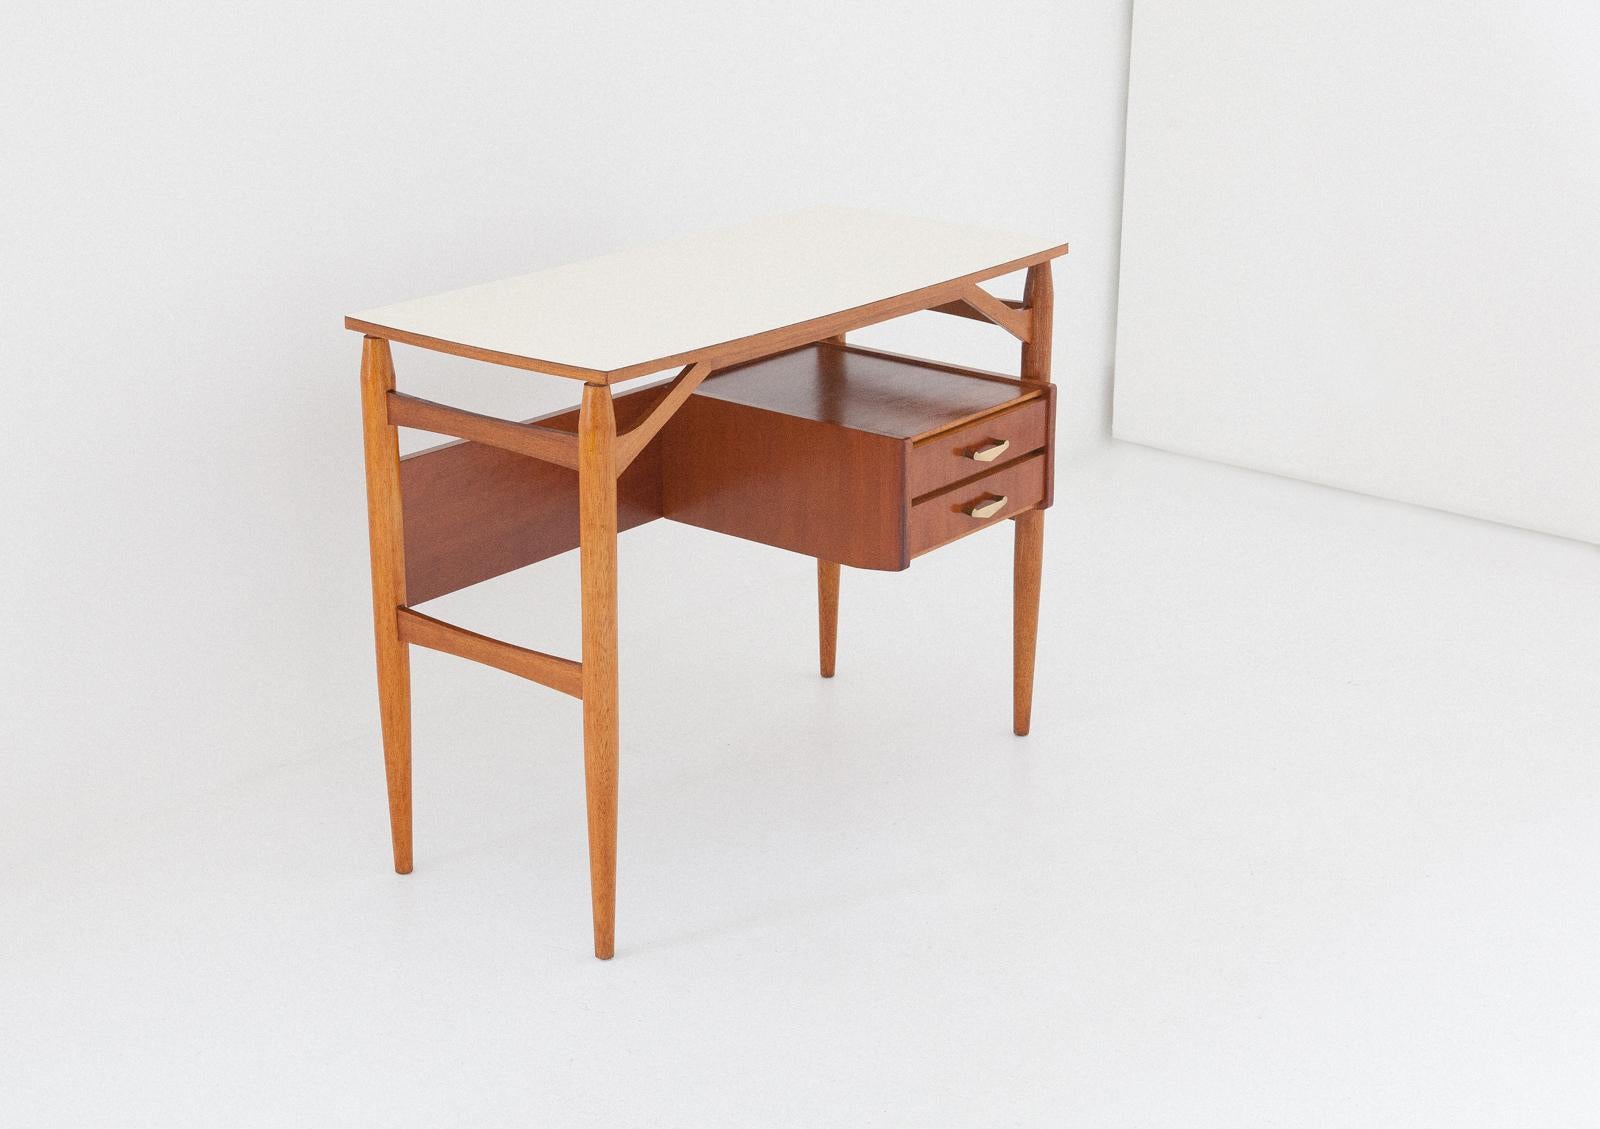 A little and charming writing table / console, manufactured in Italy during the midcentury
Italian design

Made of teak, avoire formica plane and brass handles
Completely restored.